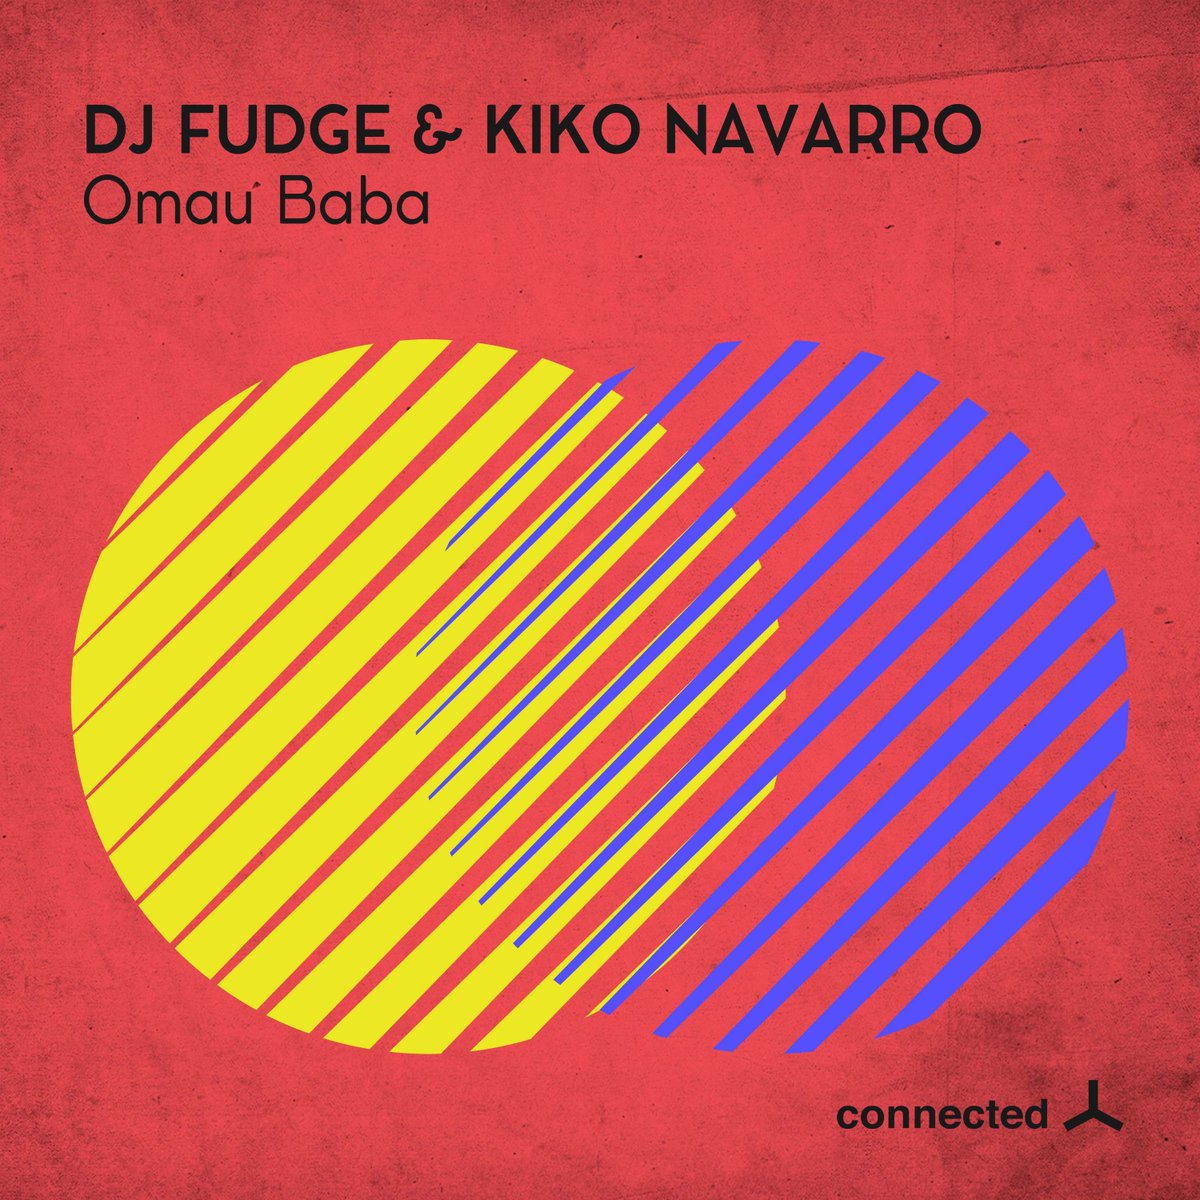 Listen to @djfudge_ & @djkikonavarro's 'Omau Baba' on #SuprematicSounds, dropping on @connectedstereo this week, here bit.ly/2JQmGAD